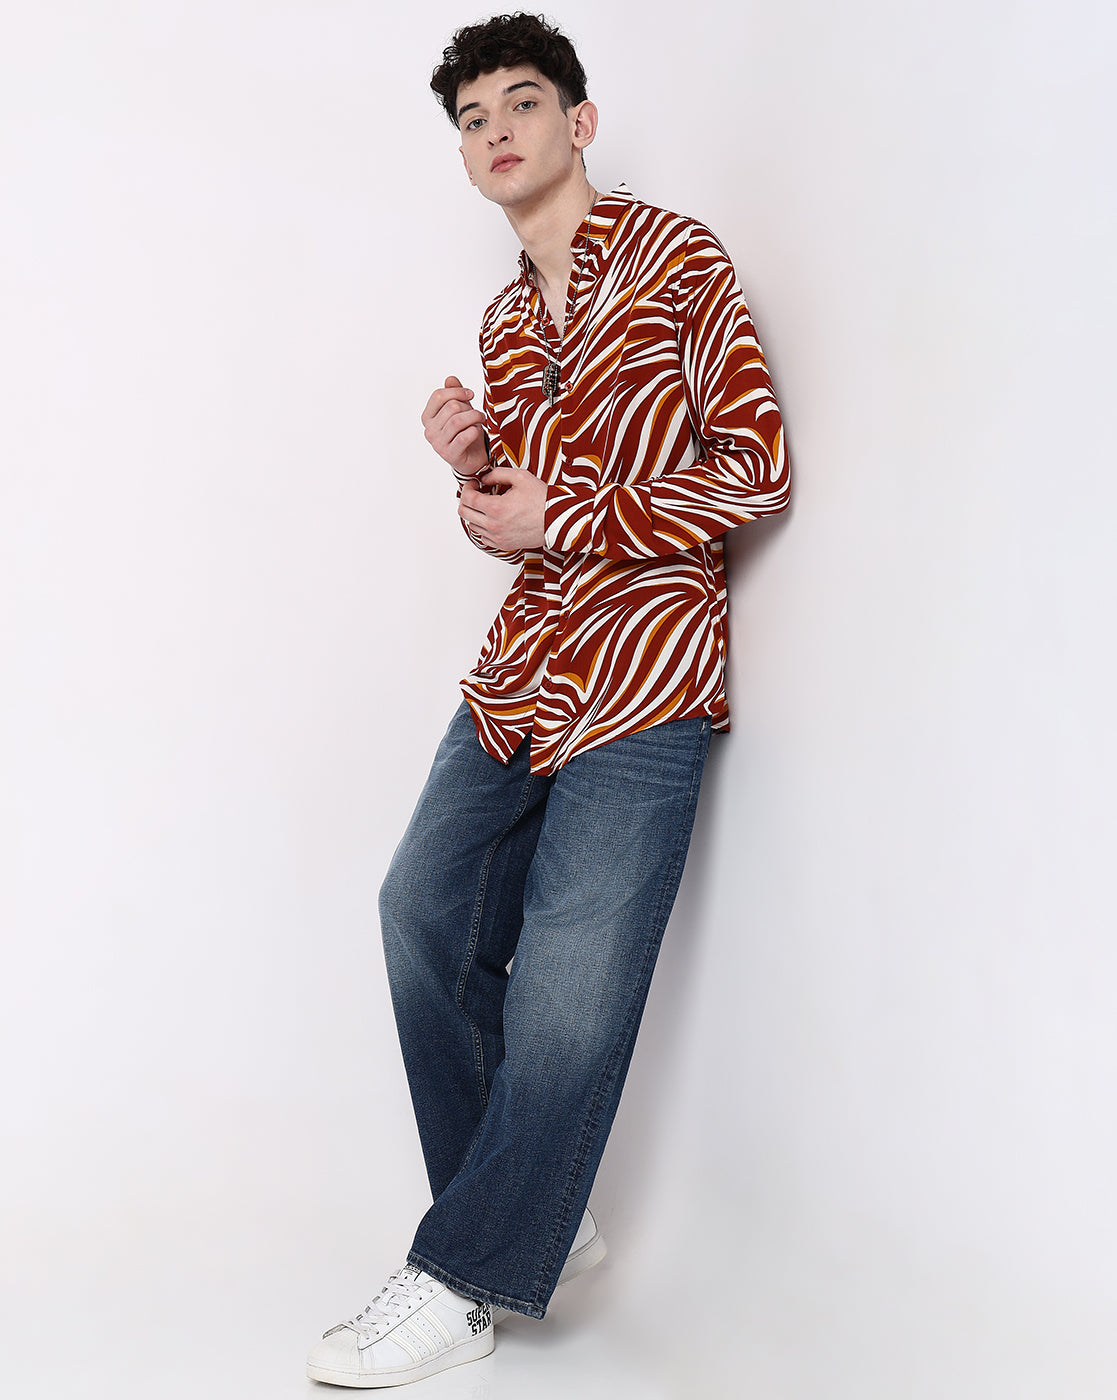 Multicolored Abstract Stripes Rayon Full Sleeves Shirt